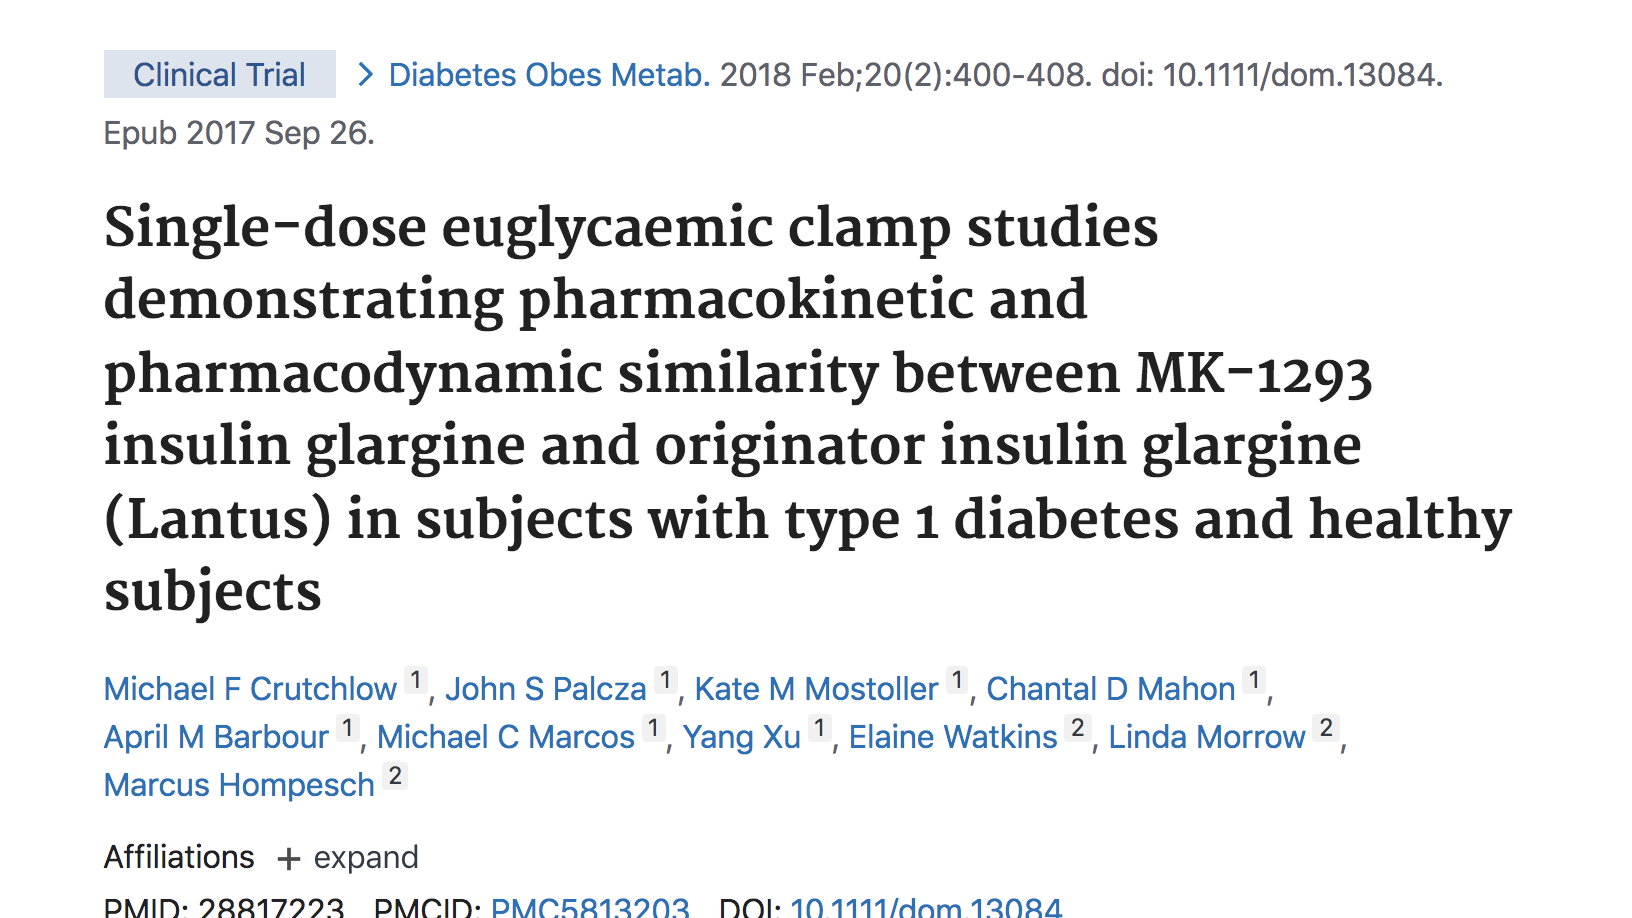 image of Single-dose euglycaemic clamp studies demonstrating pharmacokinetic and pharmacodynamic similarity between MK-1293 insulin glargine and originator insulin glargine (Lantus) in subjects with type 1 diabetes and healthy subjects.